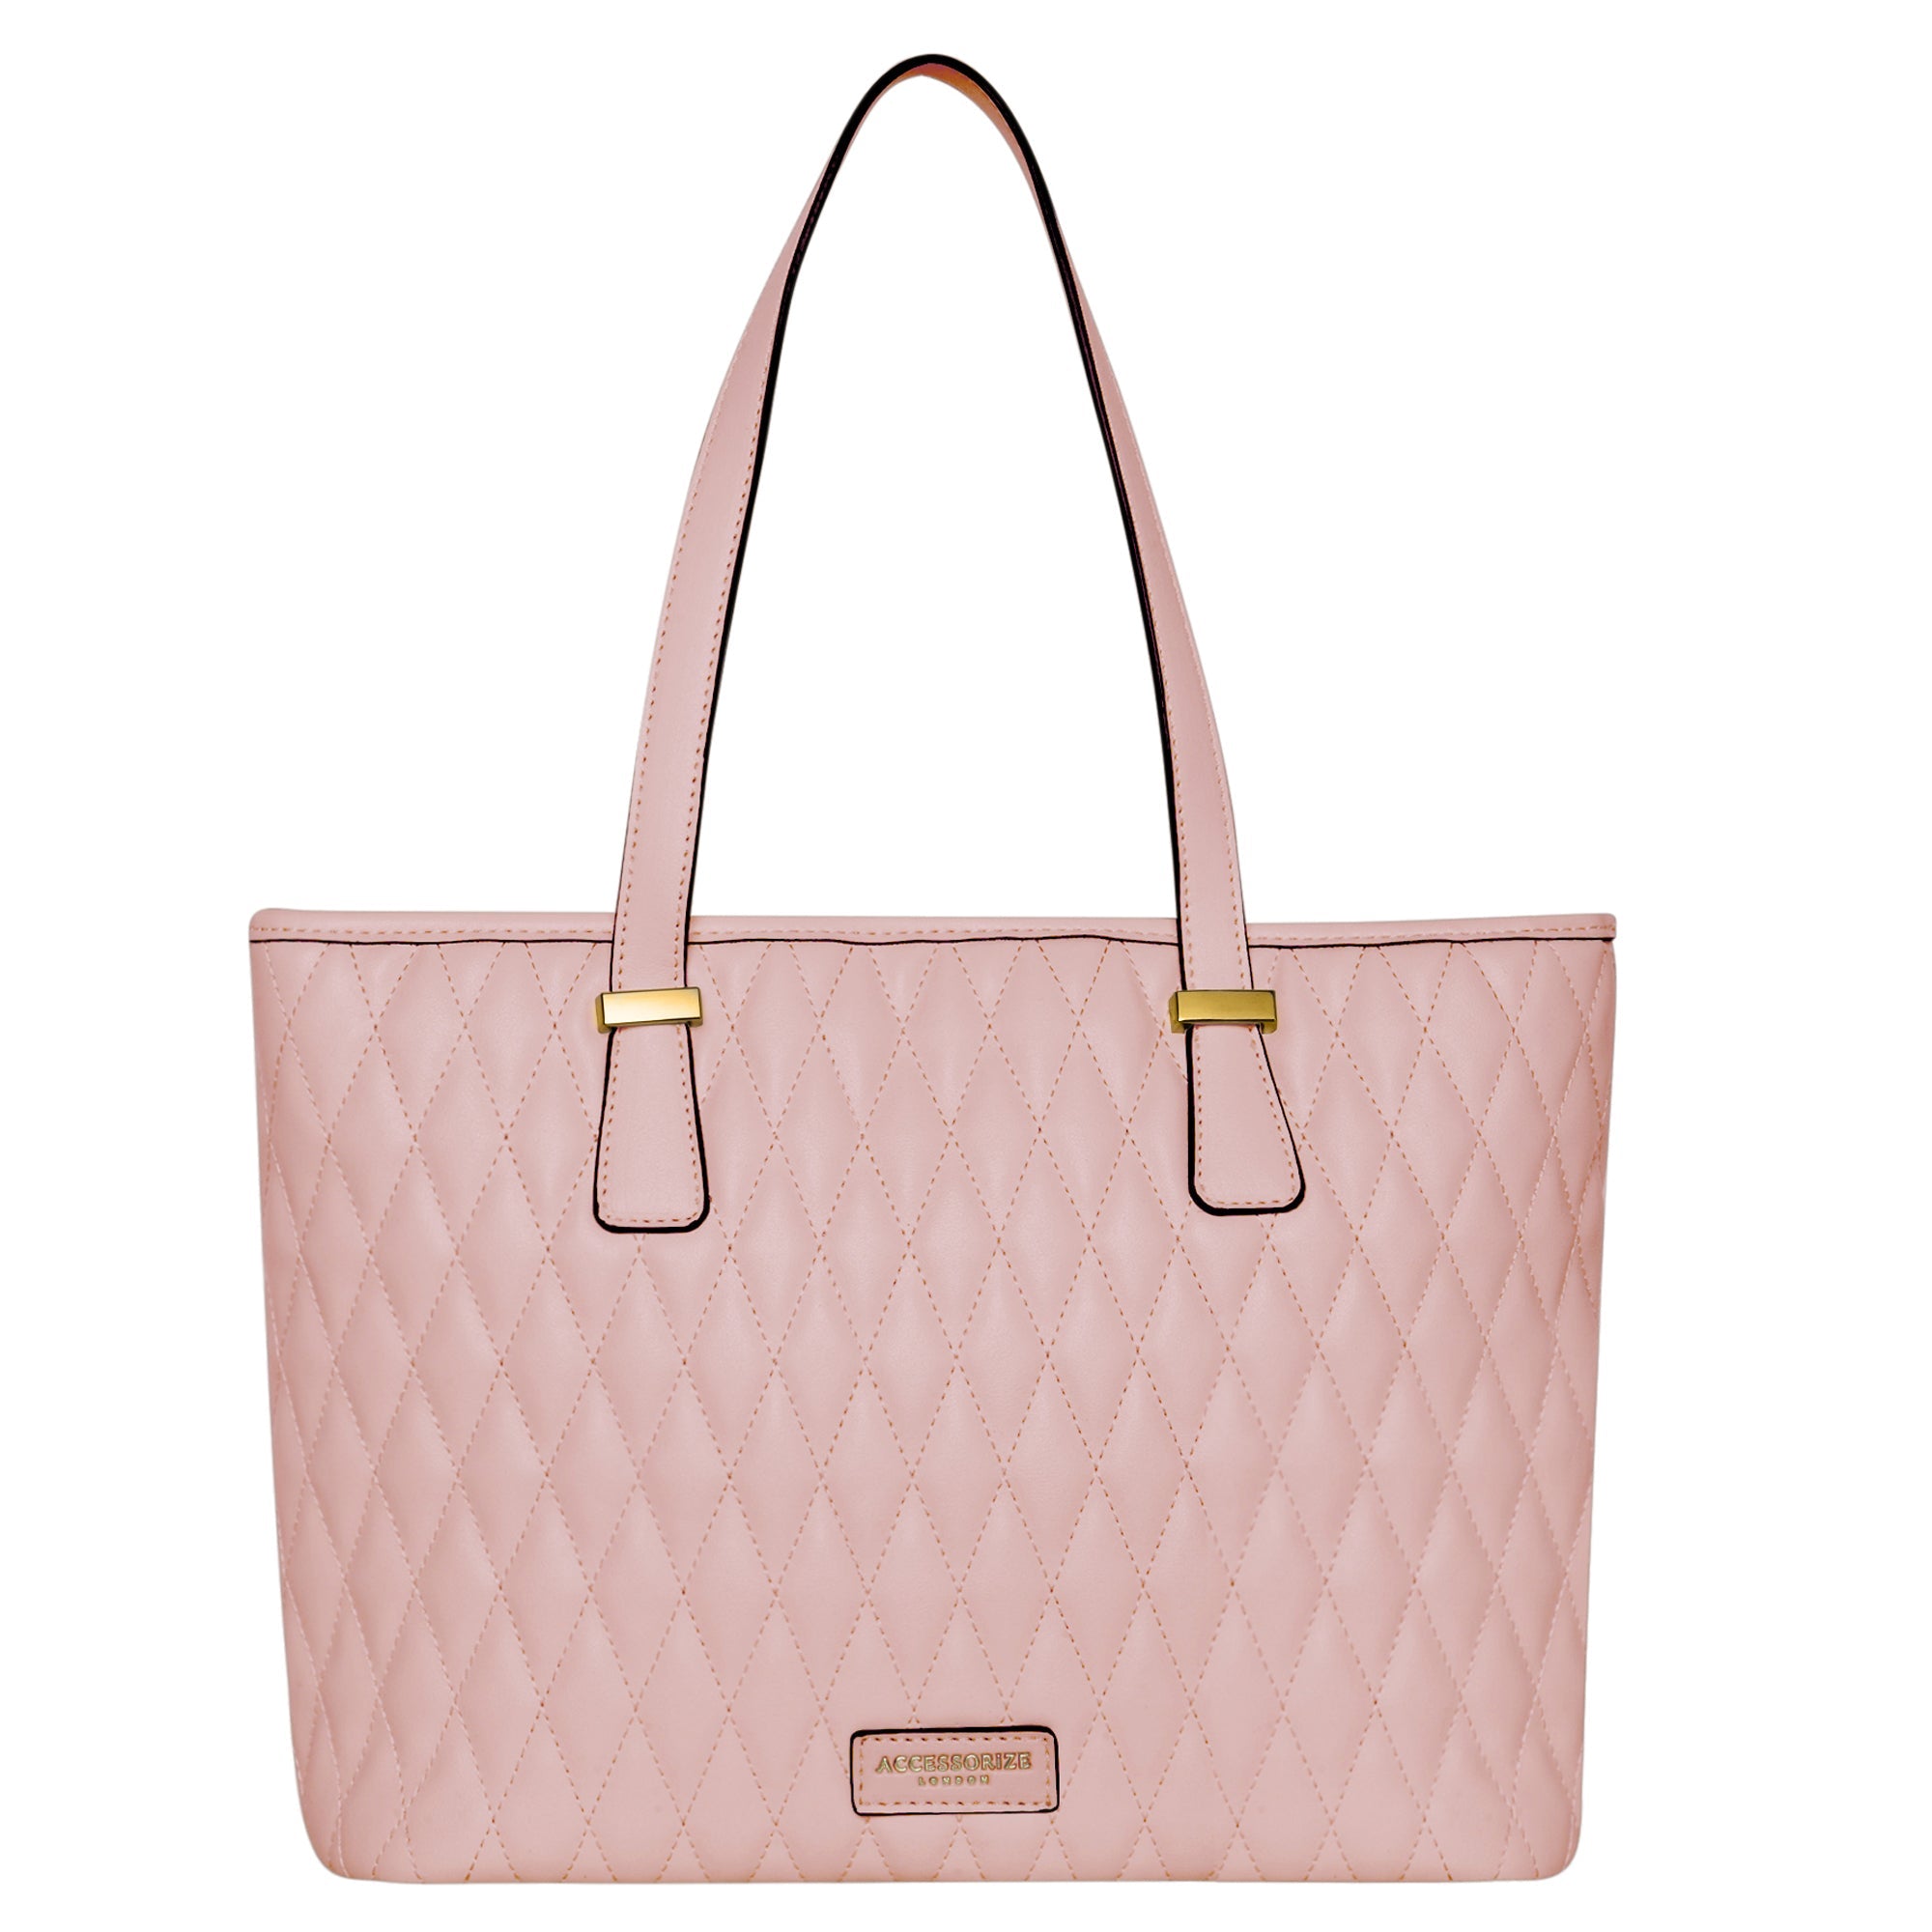 Accessorize London Women's Faux Leather Pink Lannister quilted tote Bag